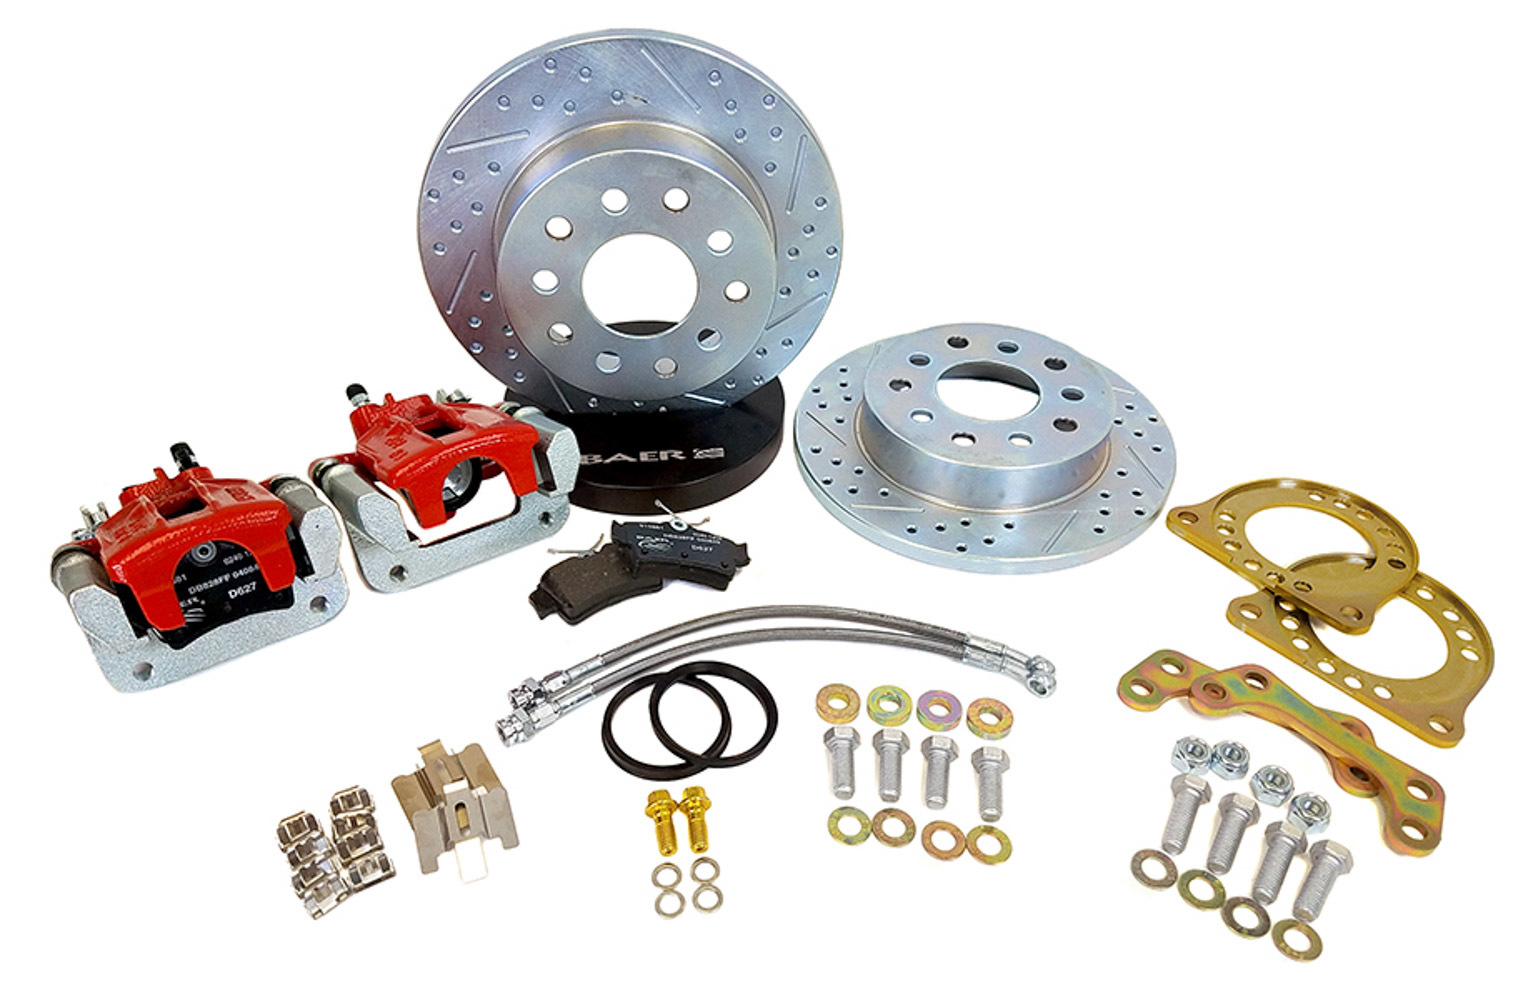 Baer Brakes 4262719R Brake System, Classic Series, Rear, 1 Piston Caliper, 10.50 in Drilled / Slotted, 1-Piece Rotor, Aluminum, Red / Zinc Plated, 5 x 4.50 in Bolt Pattern, Big Ford, Kit